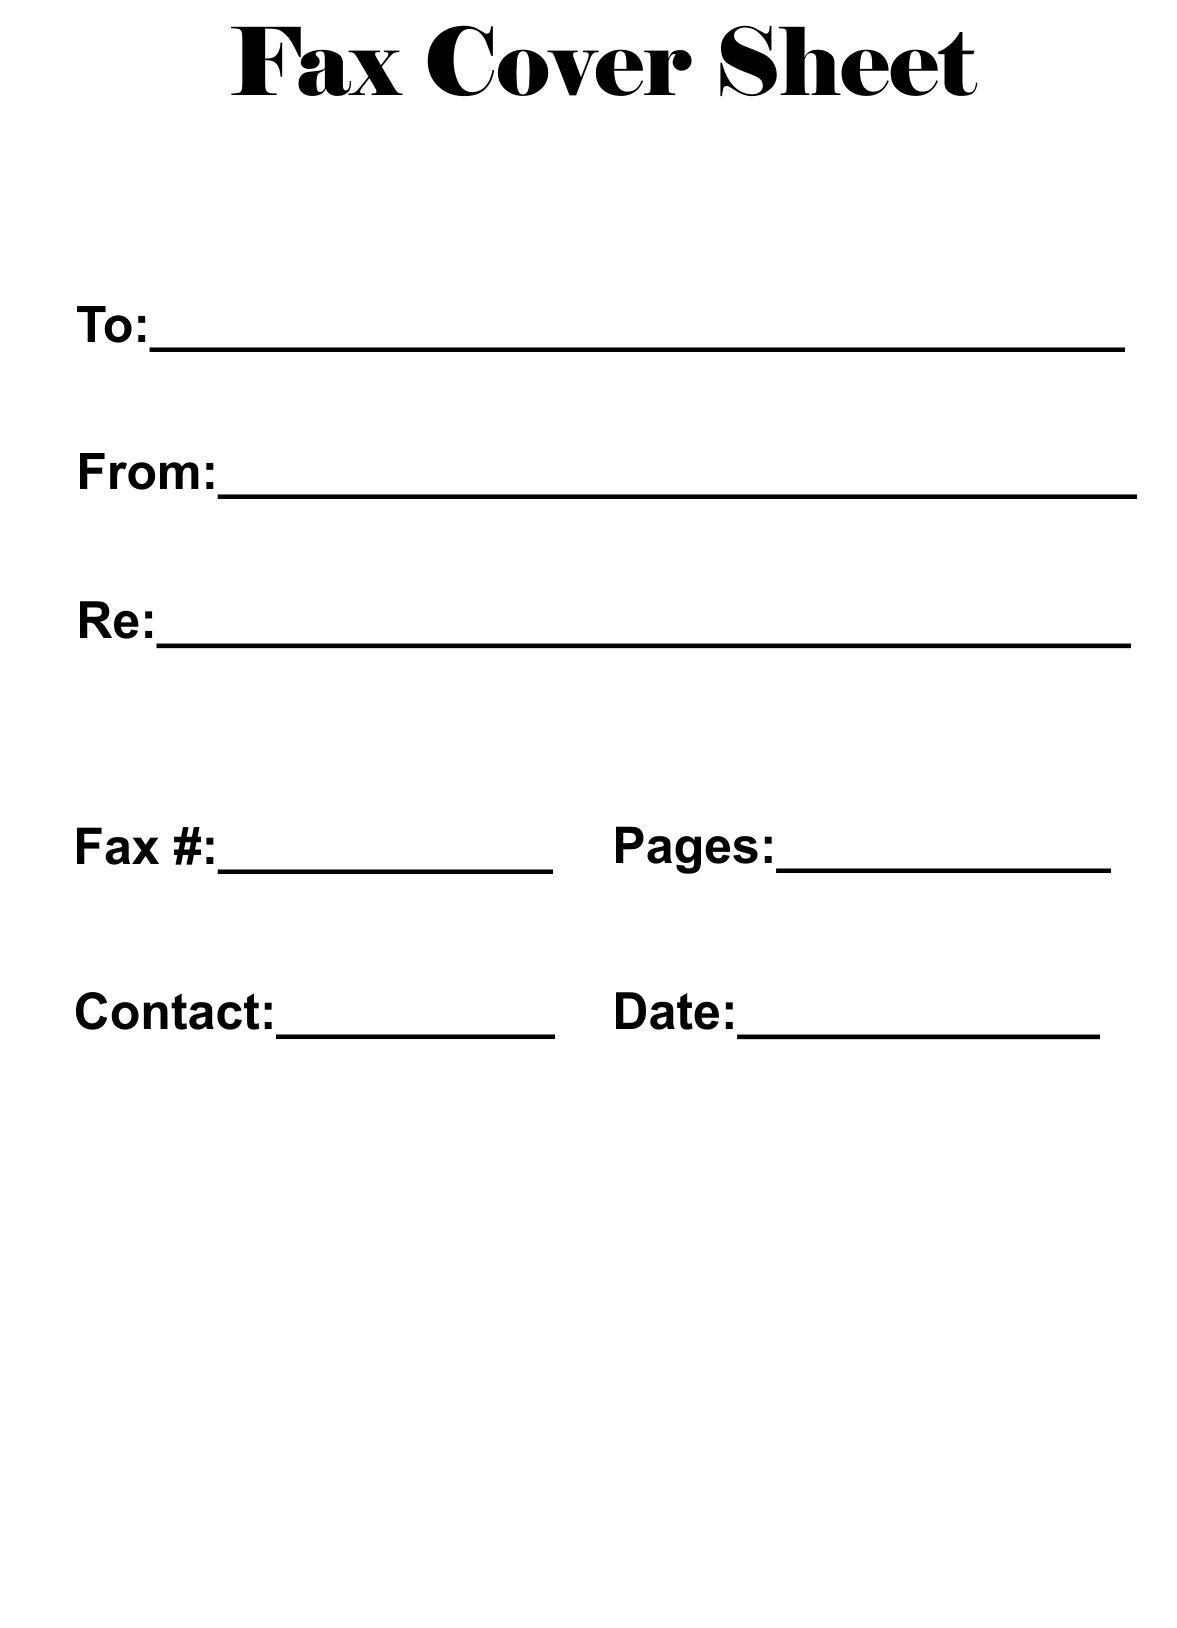 Free Fax Cover Sheet Printable